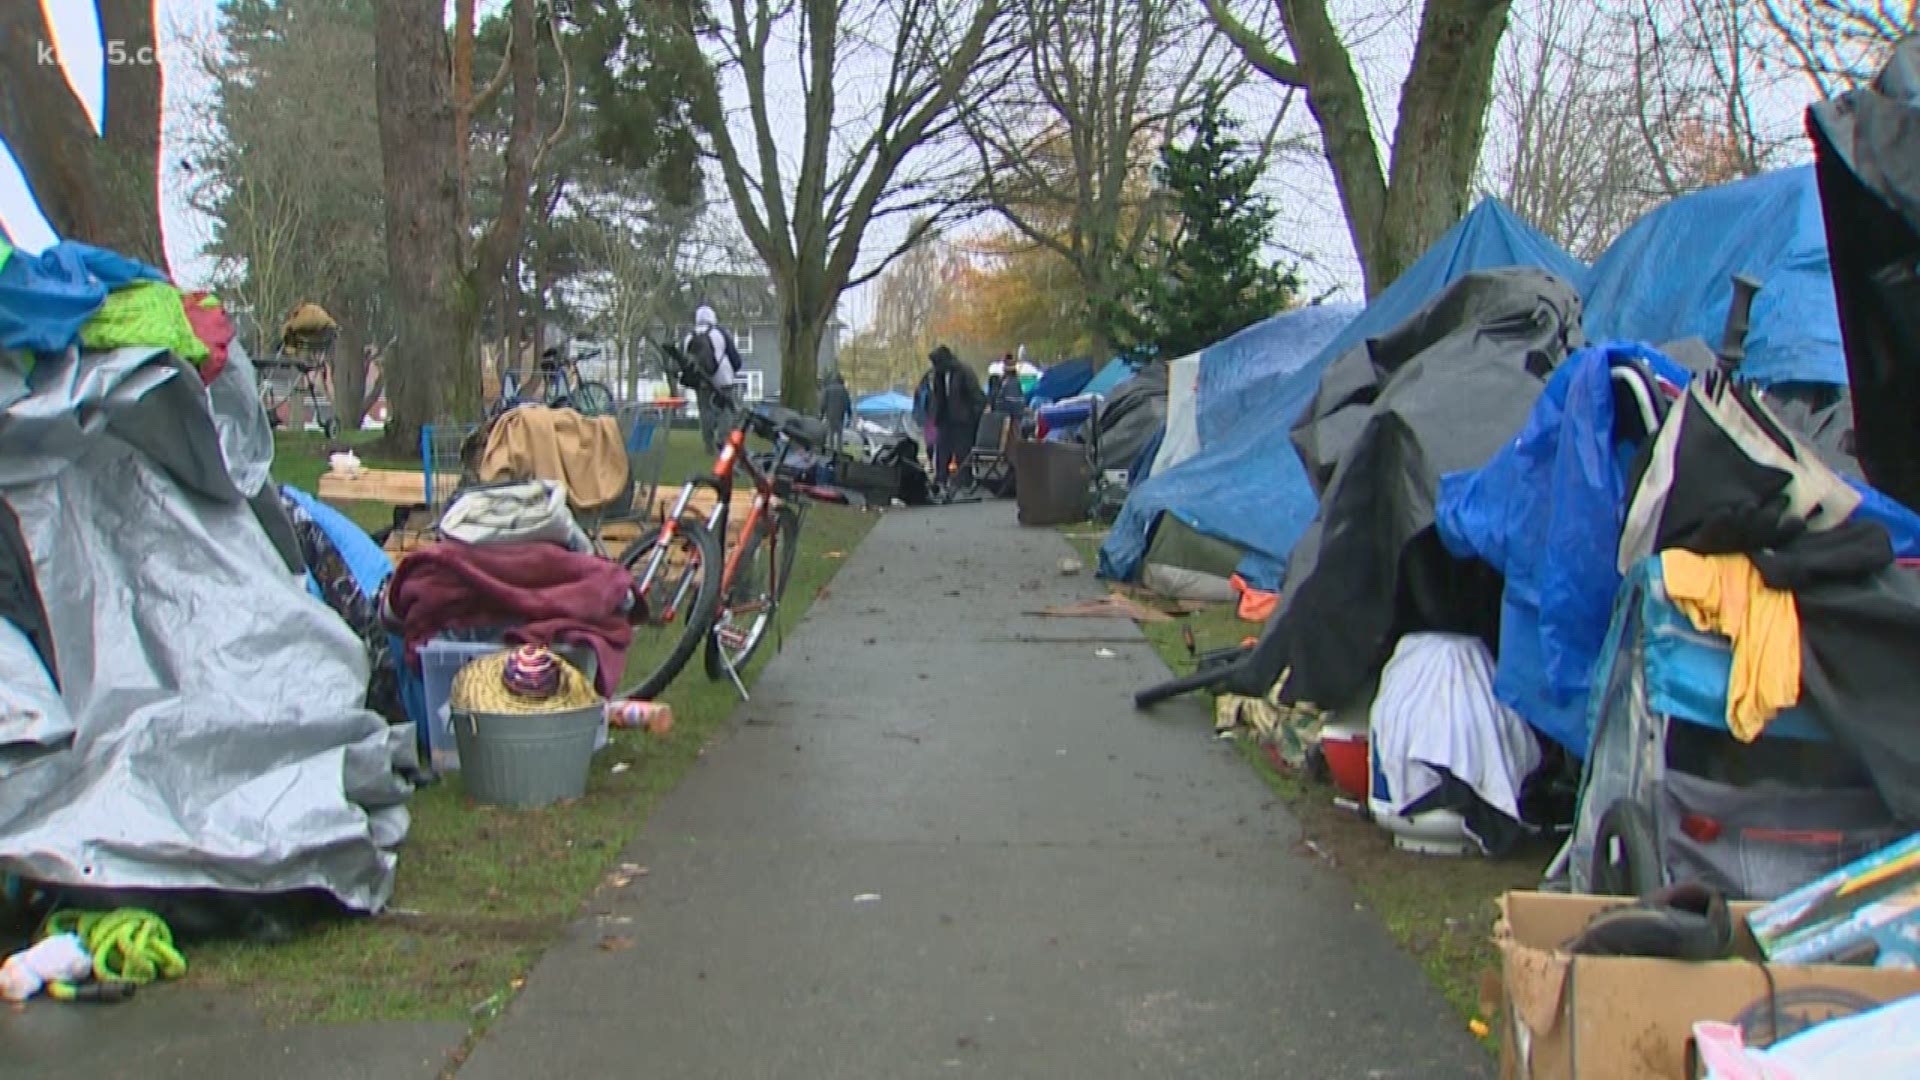 A public camping ban in Tacoma will go into effect in December.